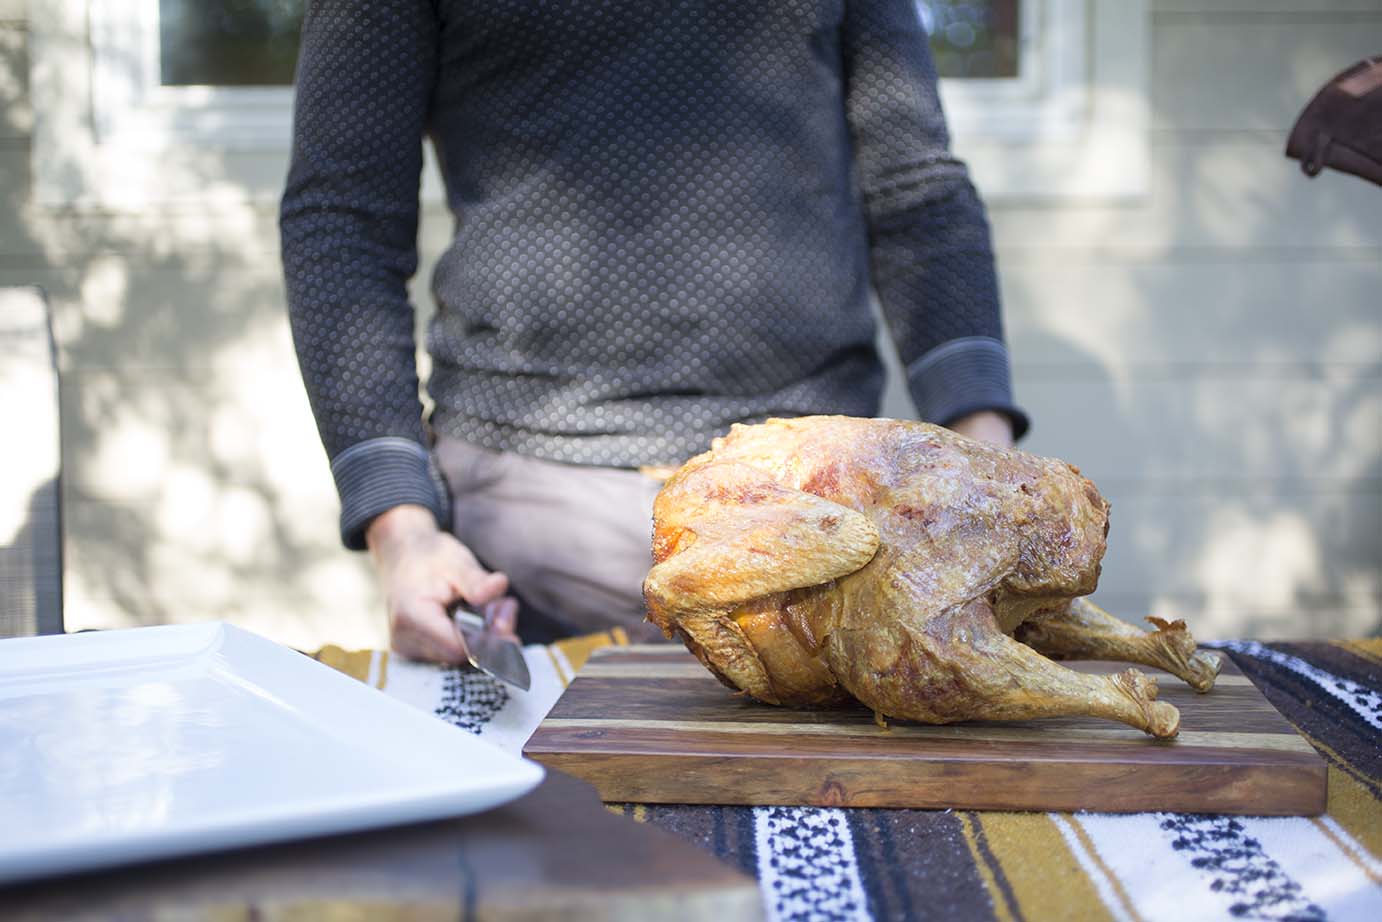 A crispy deep-fried turkey is shown on a wooden table in front of a man with knife 